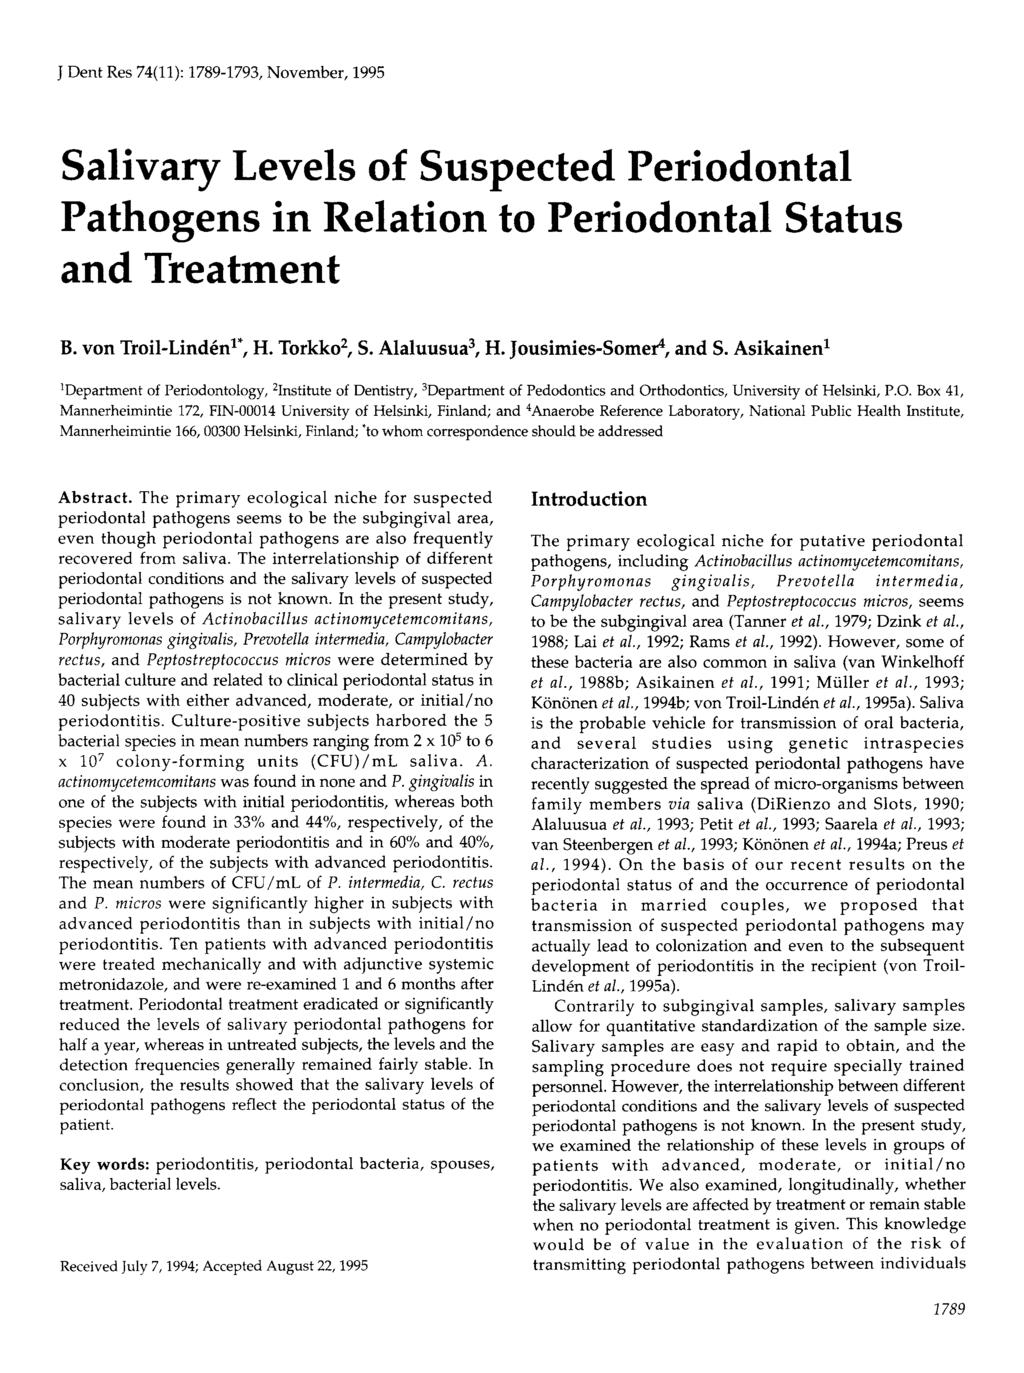 J Dent Res 74(11): 1789-1793, November, 1995 Salivary Levels of Suspected Periodontal Pathogens in Relation to Periodontal Status and Treatment B. von Troil-Lindenl*, H. Torkko2, S. Alaluusua3, H.